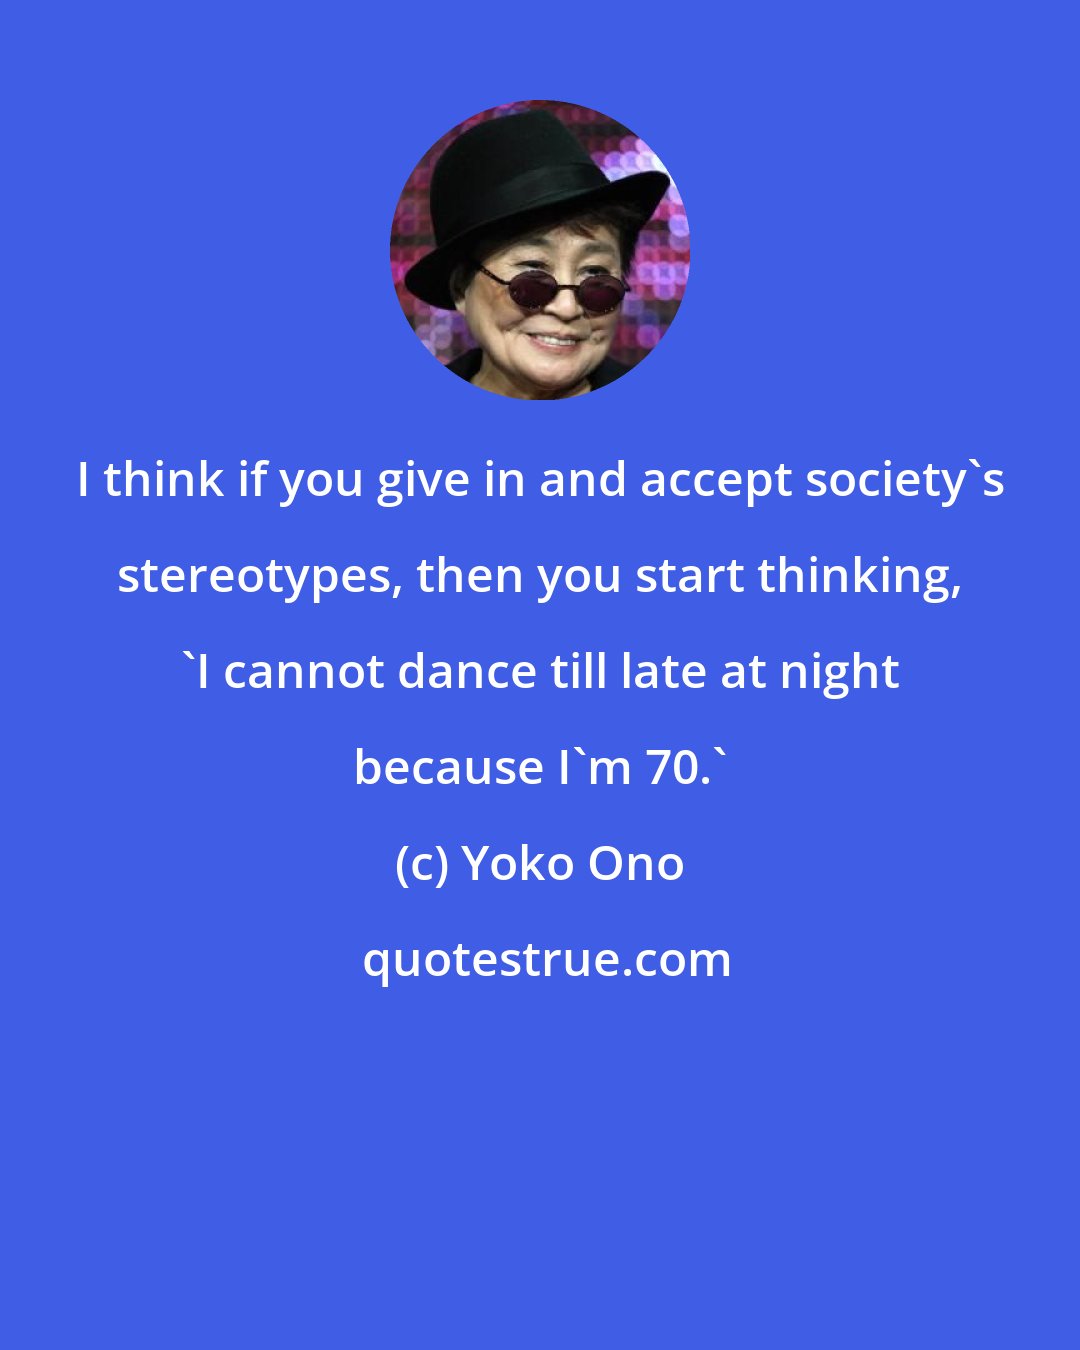 Yoko Ono: I think if you give in and accept society's stereotypes, then you start thinking, 'I cannot dance till late at night because I'm 70.'